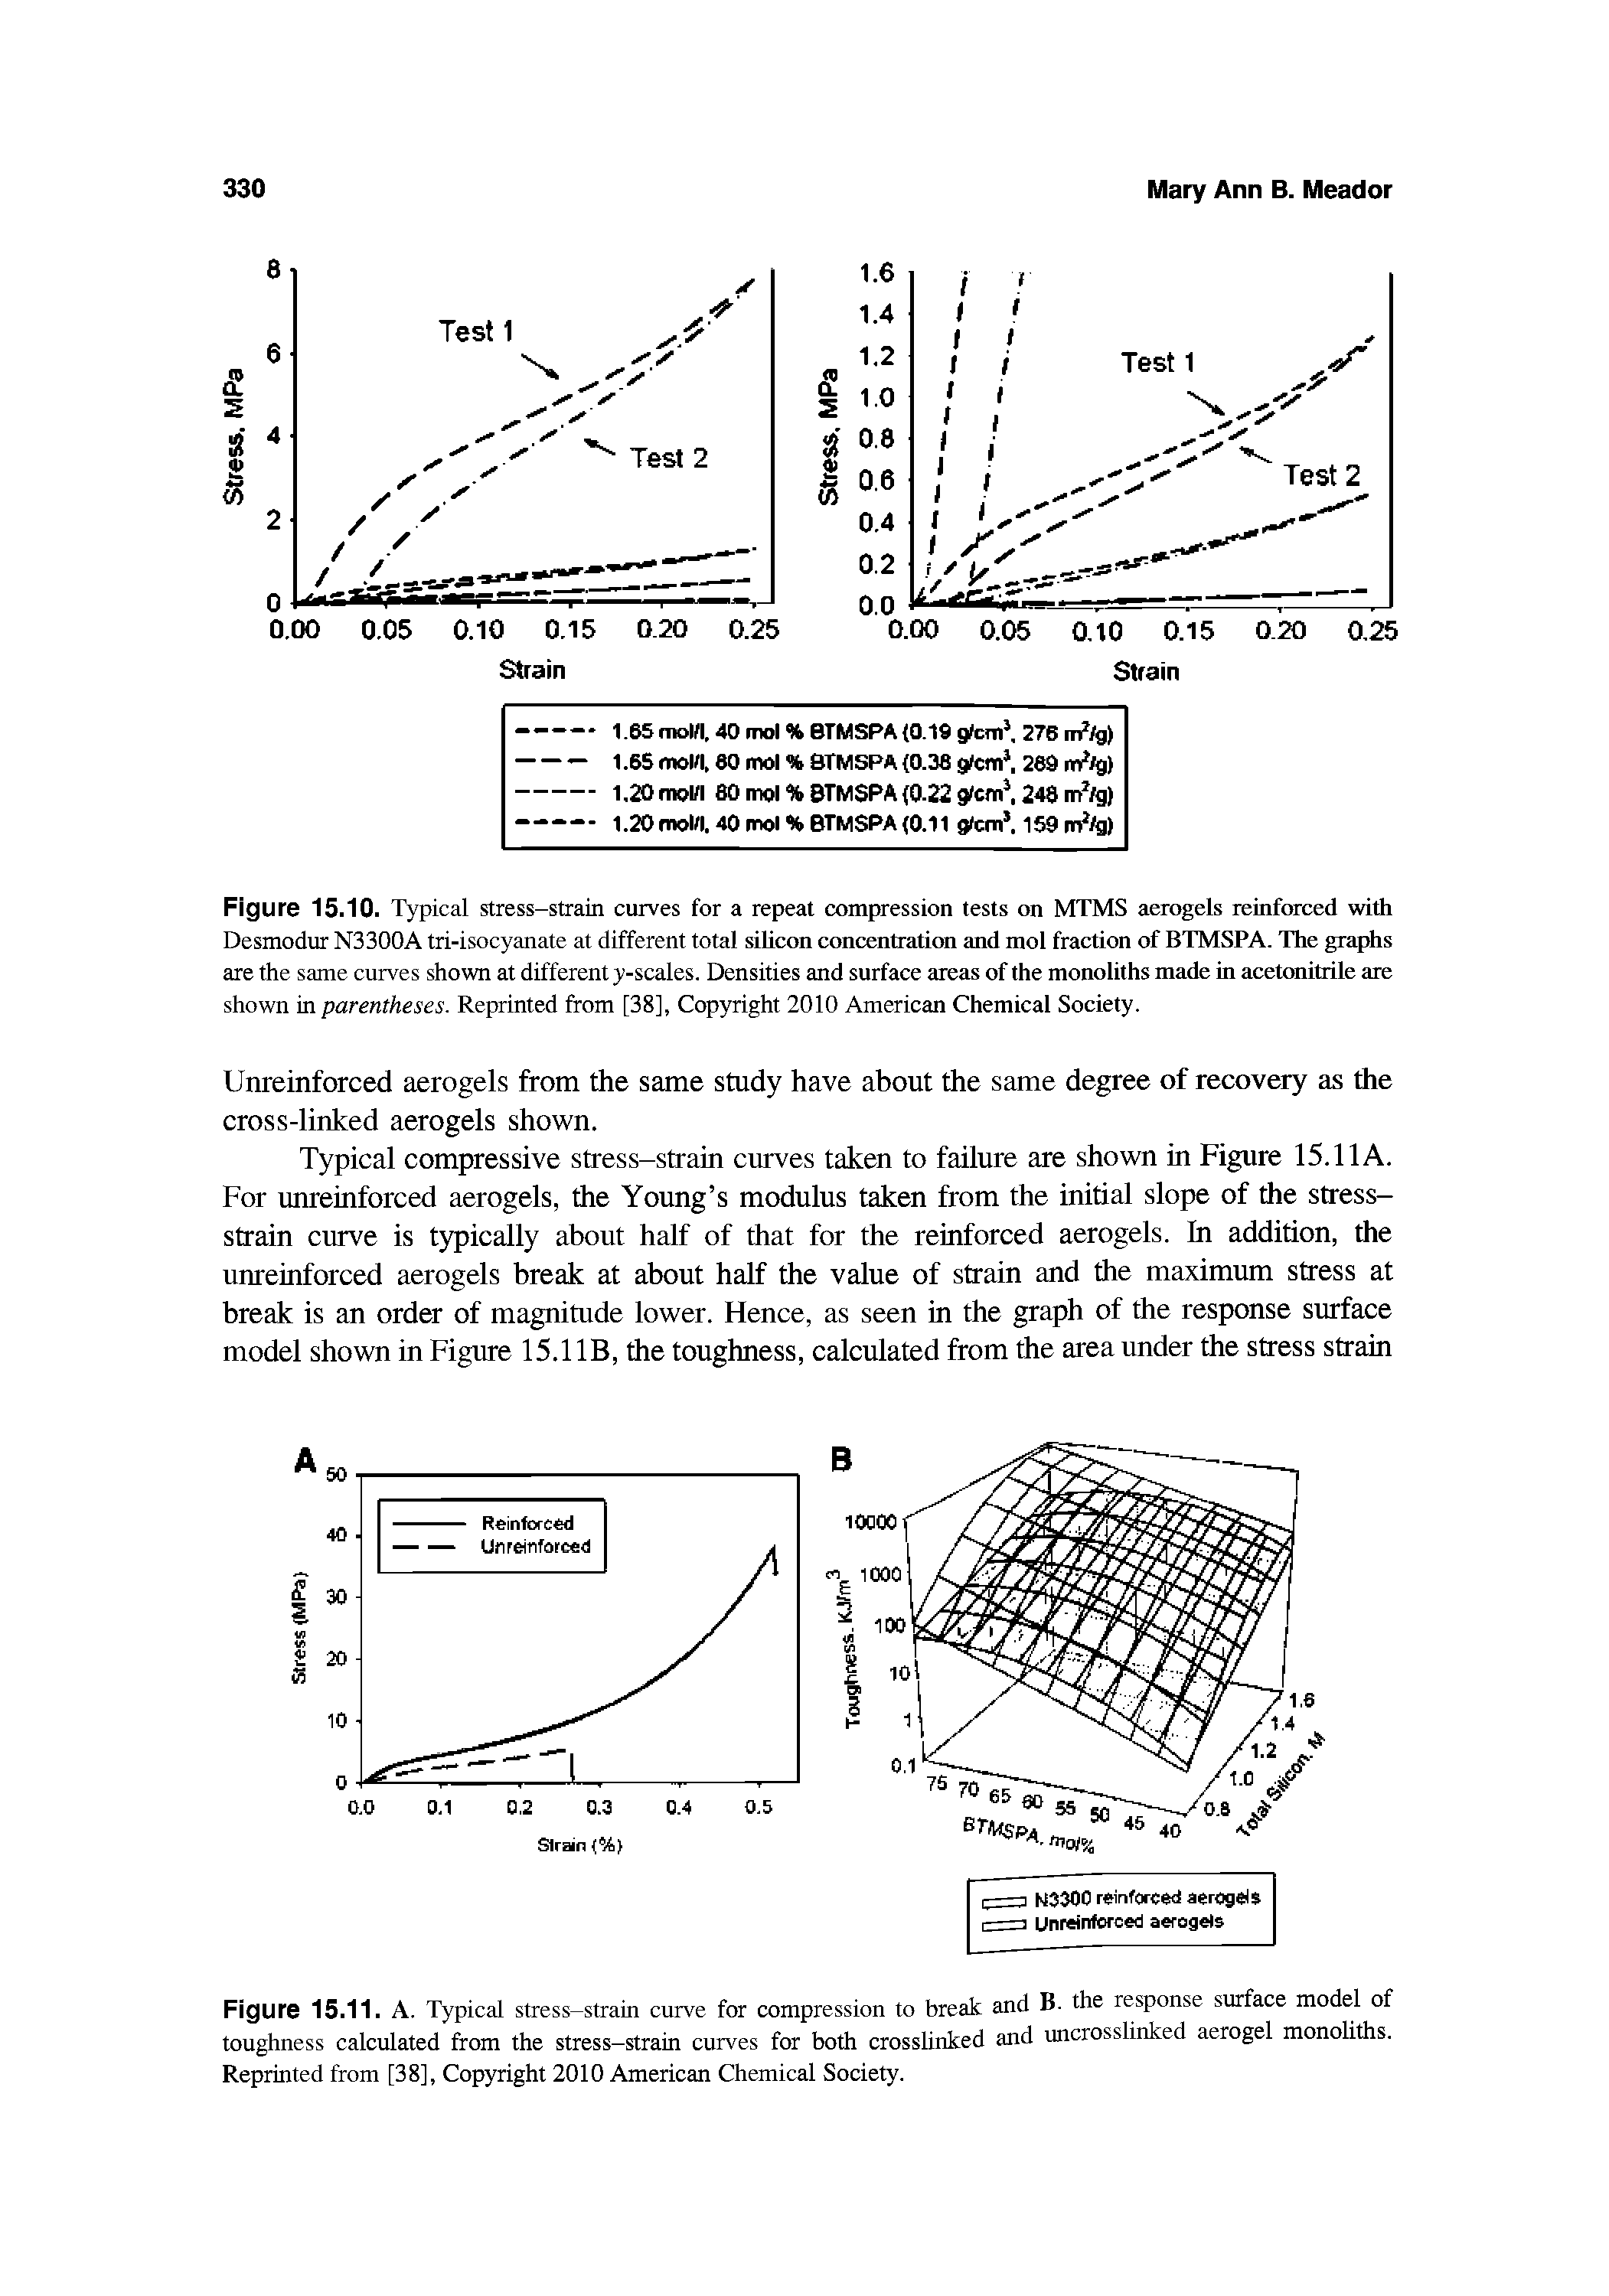 Figure 15.10. Typical stress-strain curves for a repeat compression tests on MTMS aerogels reinforced with Desmodur N3300A tri-isocyanate at different total silicon concentration and mol fraction of BTMSPA. The graphs are the same curves shown at different y-scales. Densities and surface areas of the monoliths made in acetonitrile are shown in parentheses. Reprinted from [38]. Copyright 2010 American Chemical Society.